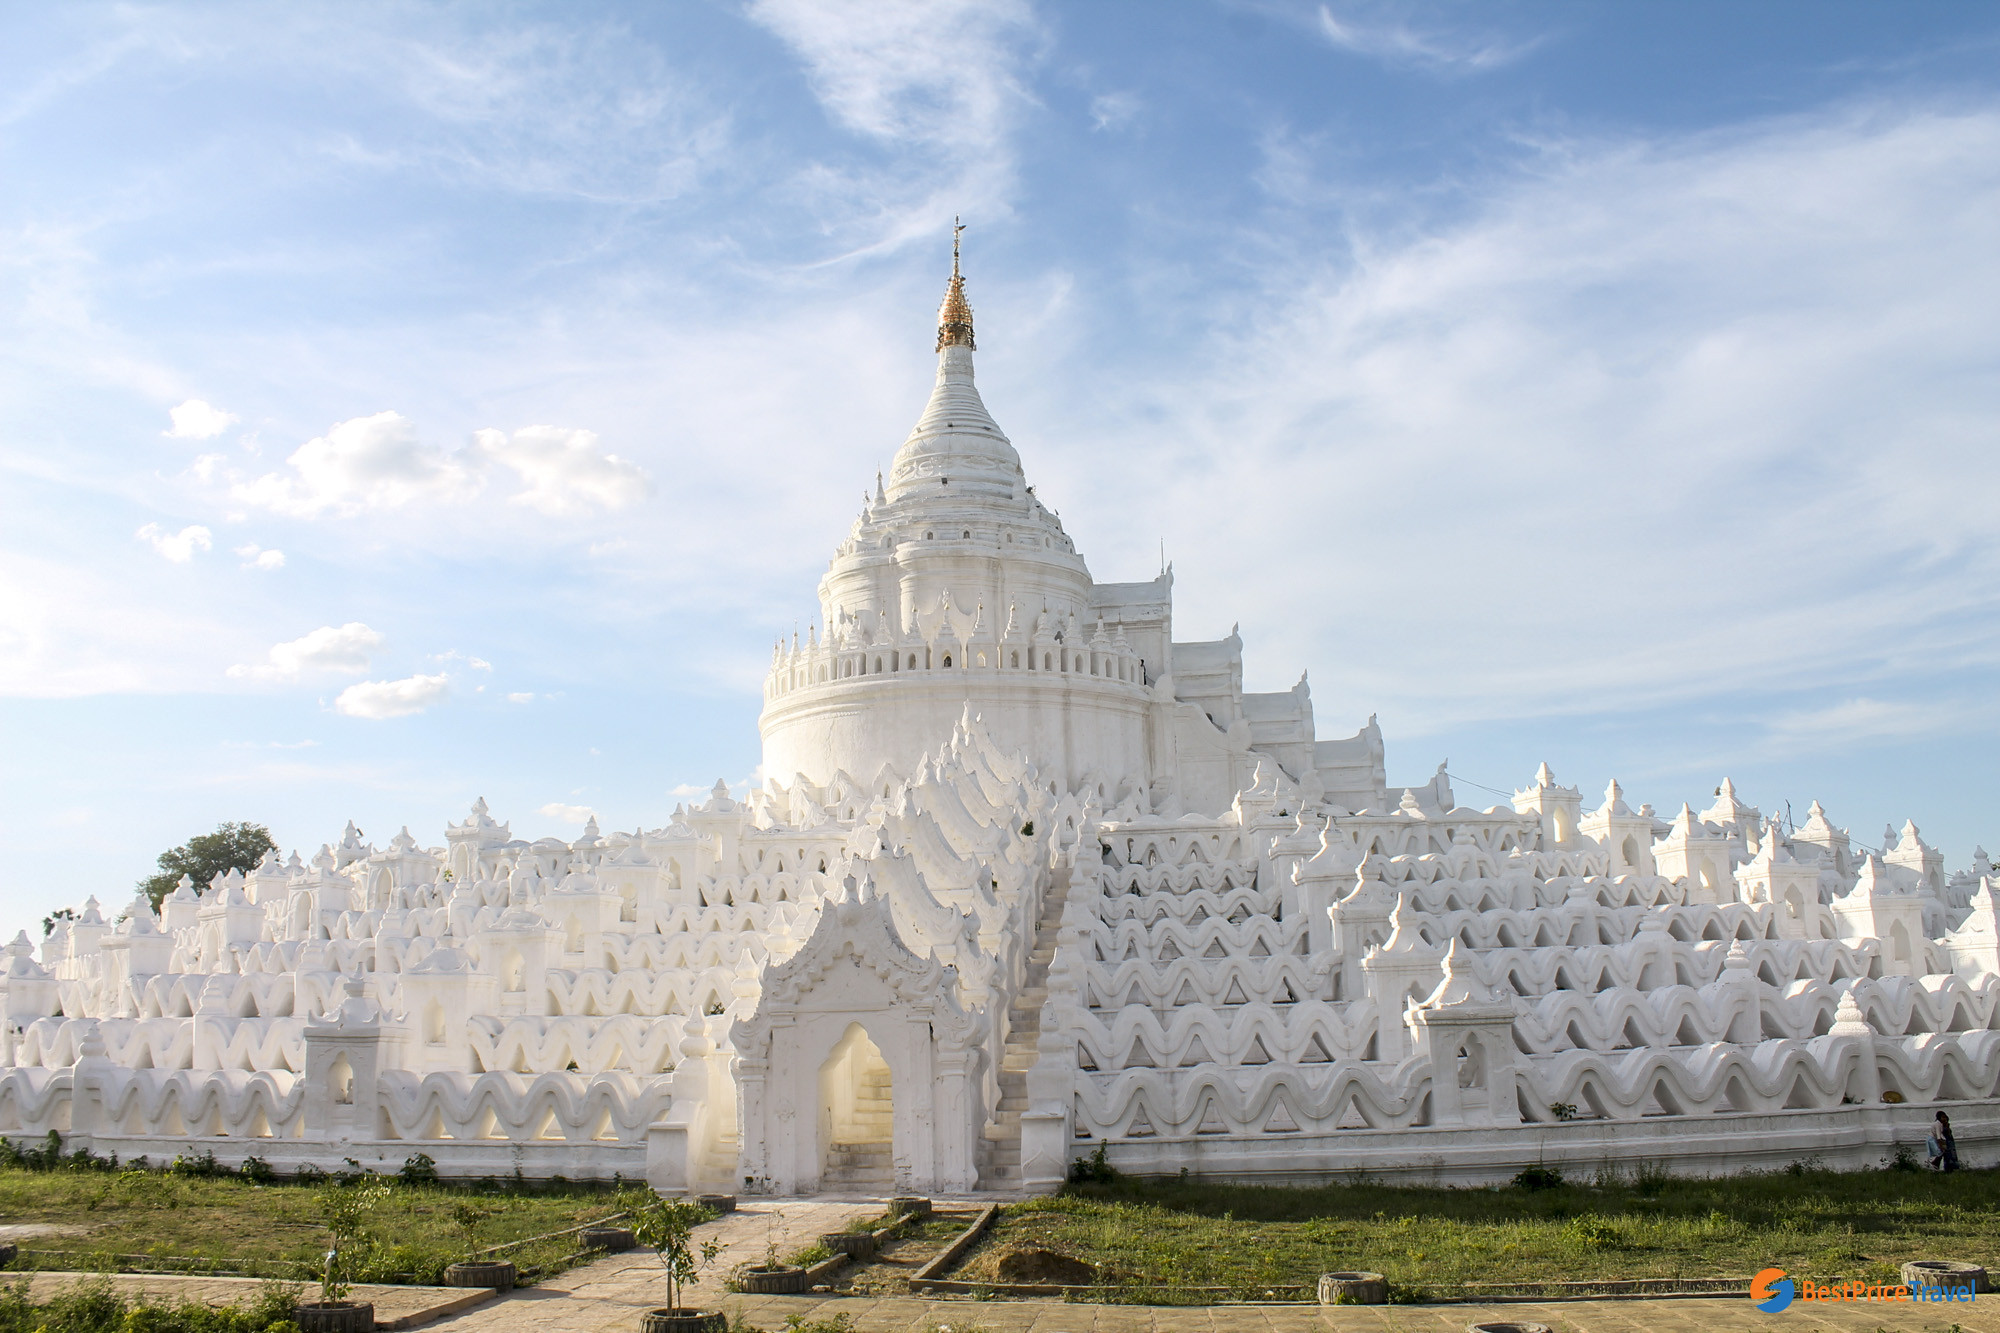 The Hsinbyume Pagoda in white